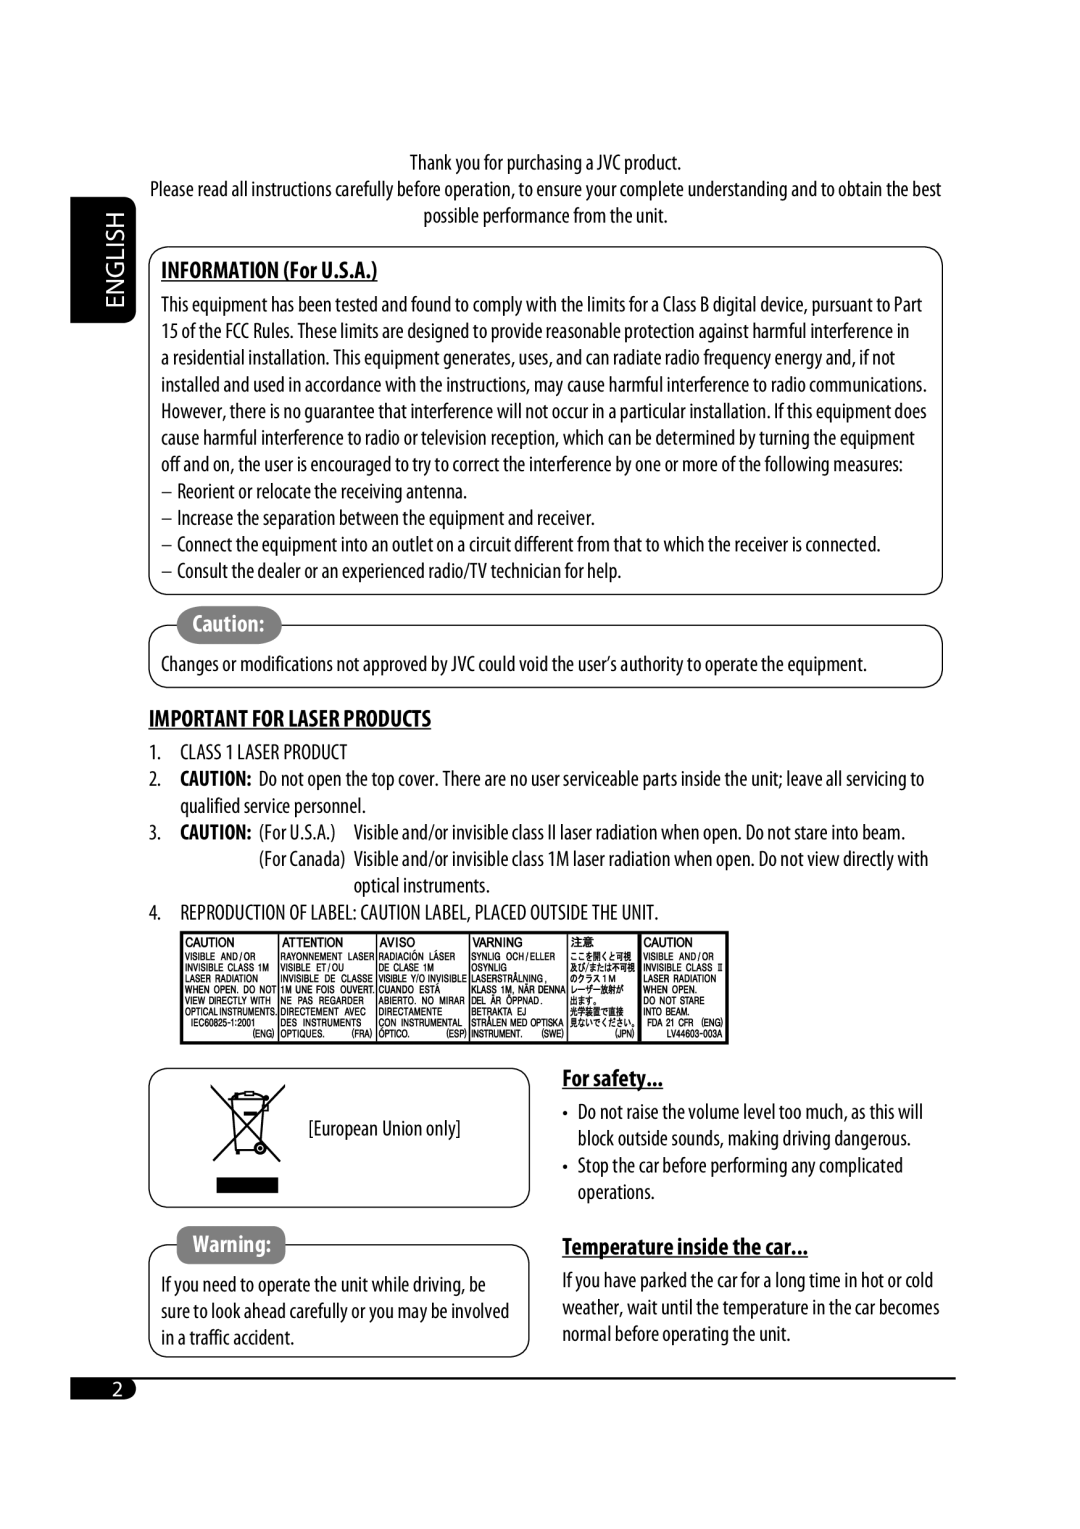 JVC KD-S33 manual English, INFORMATION For U.S.A, Important For Laser Products, For safety, Temperature inside the car 